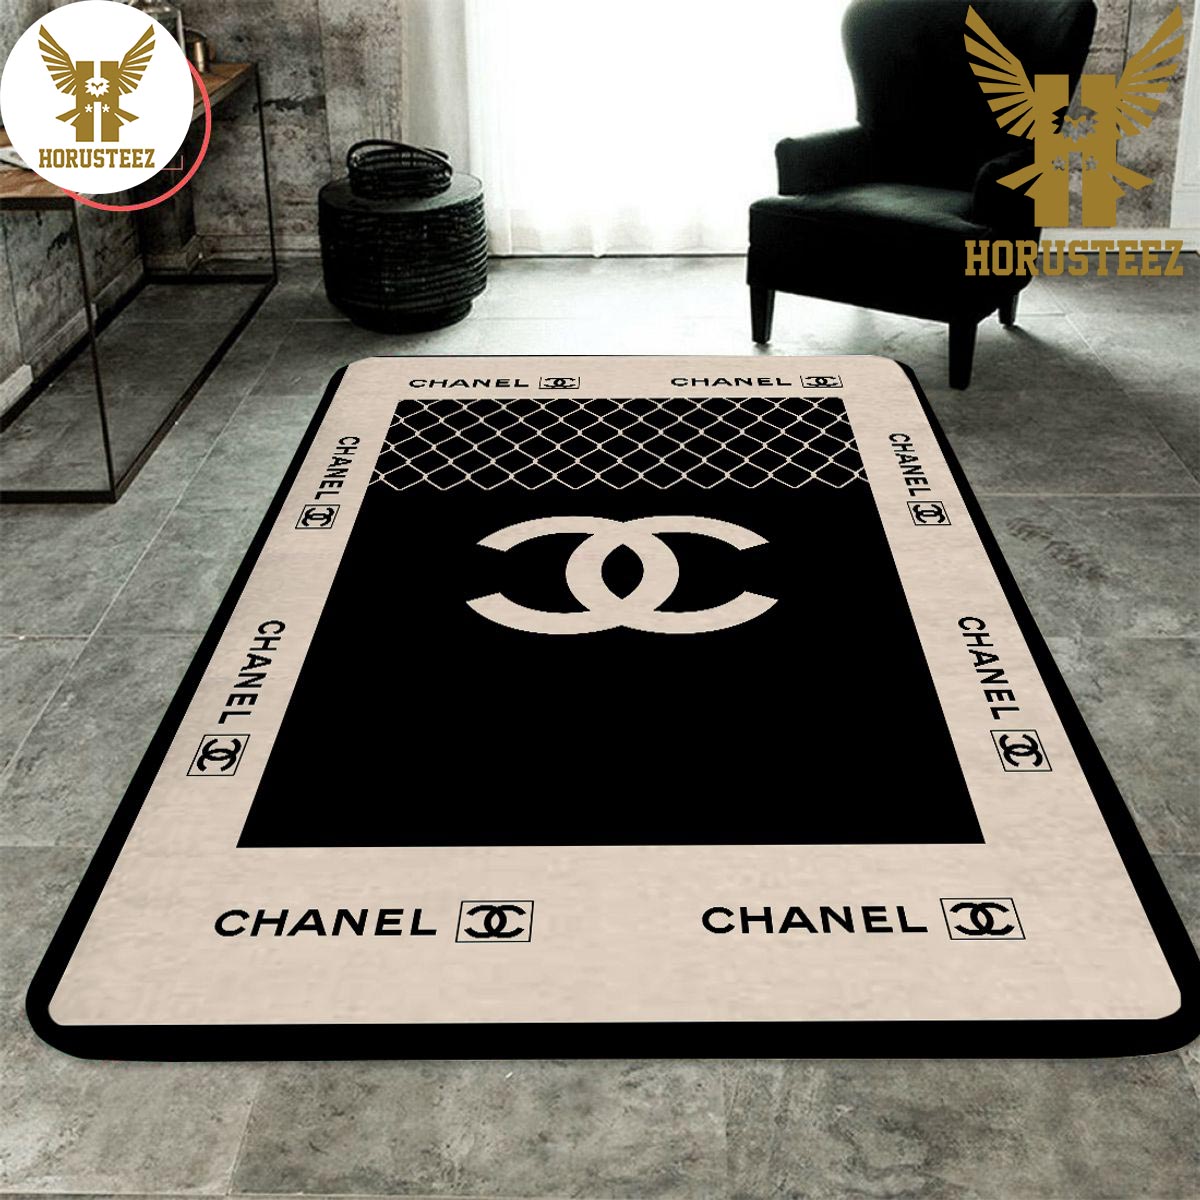 coco chanel bathroom decor sets with shower curtains and rugs